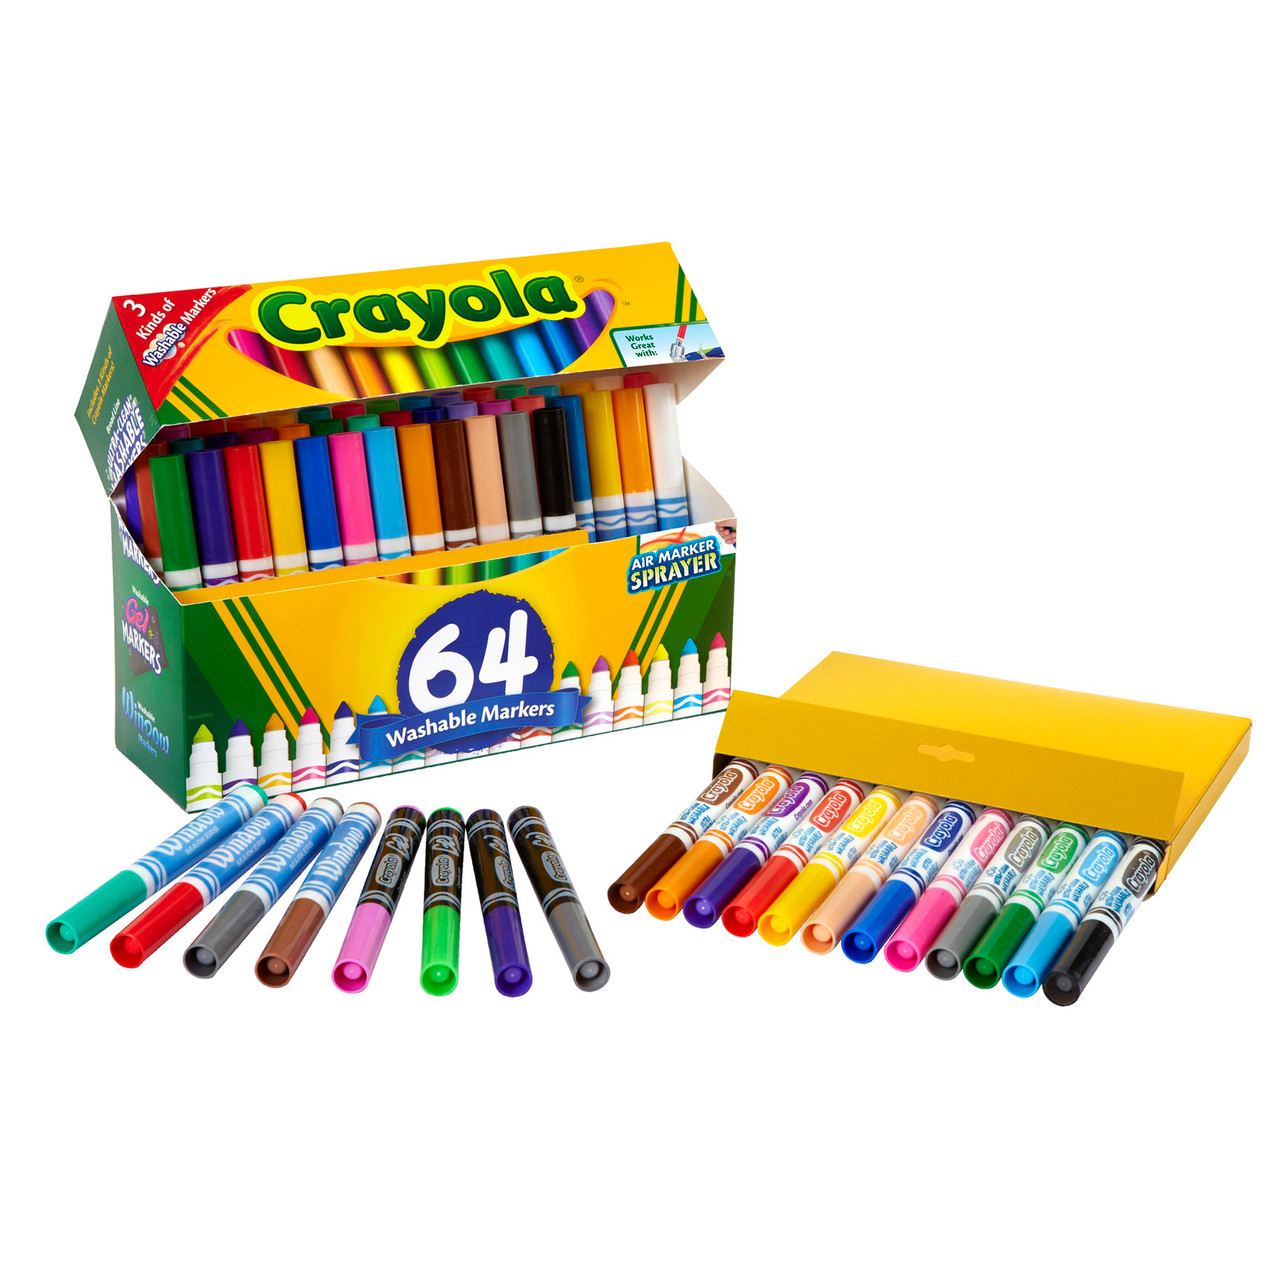 Crayola Washable Marker Classroom Set, Conical Tip, 8 Assorted